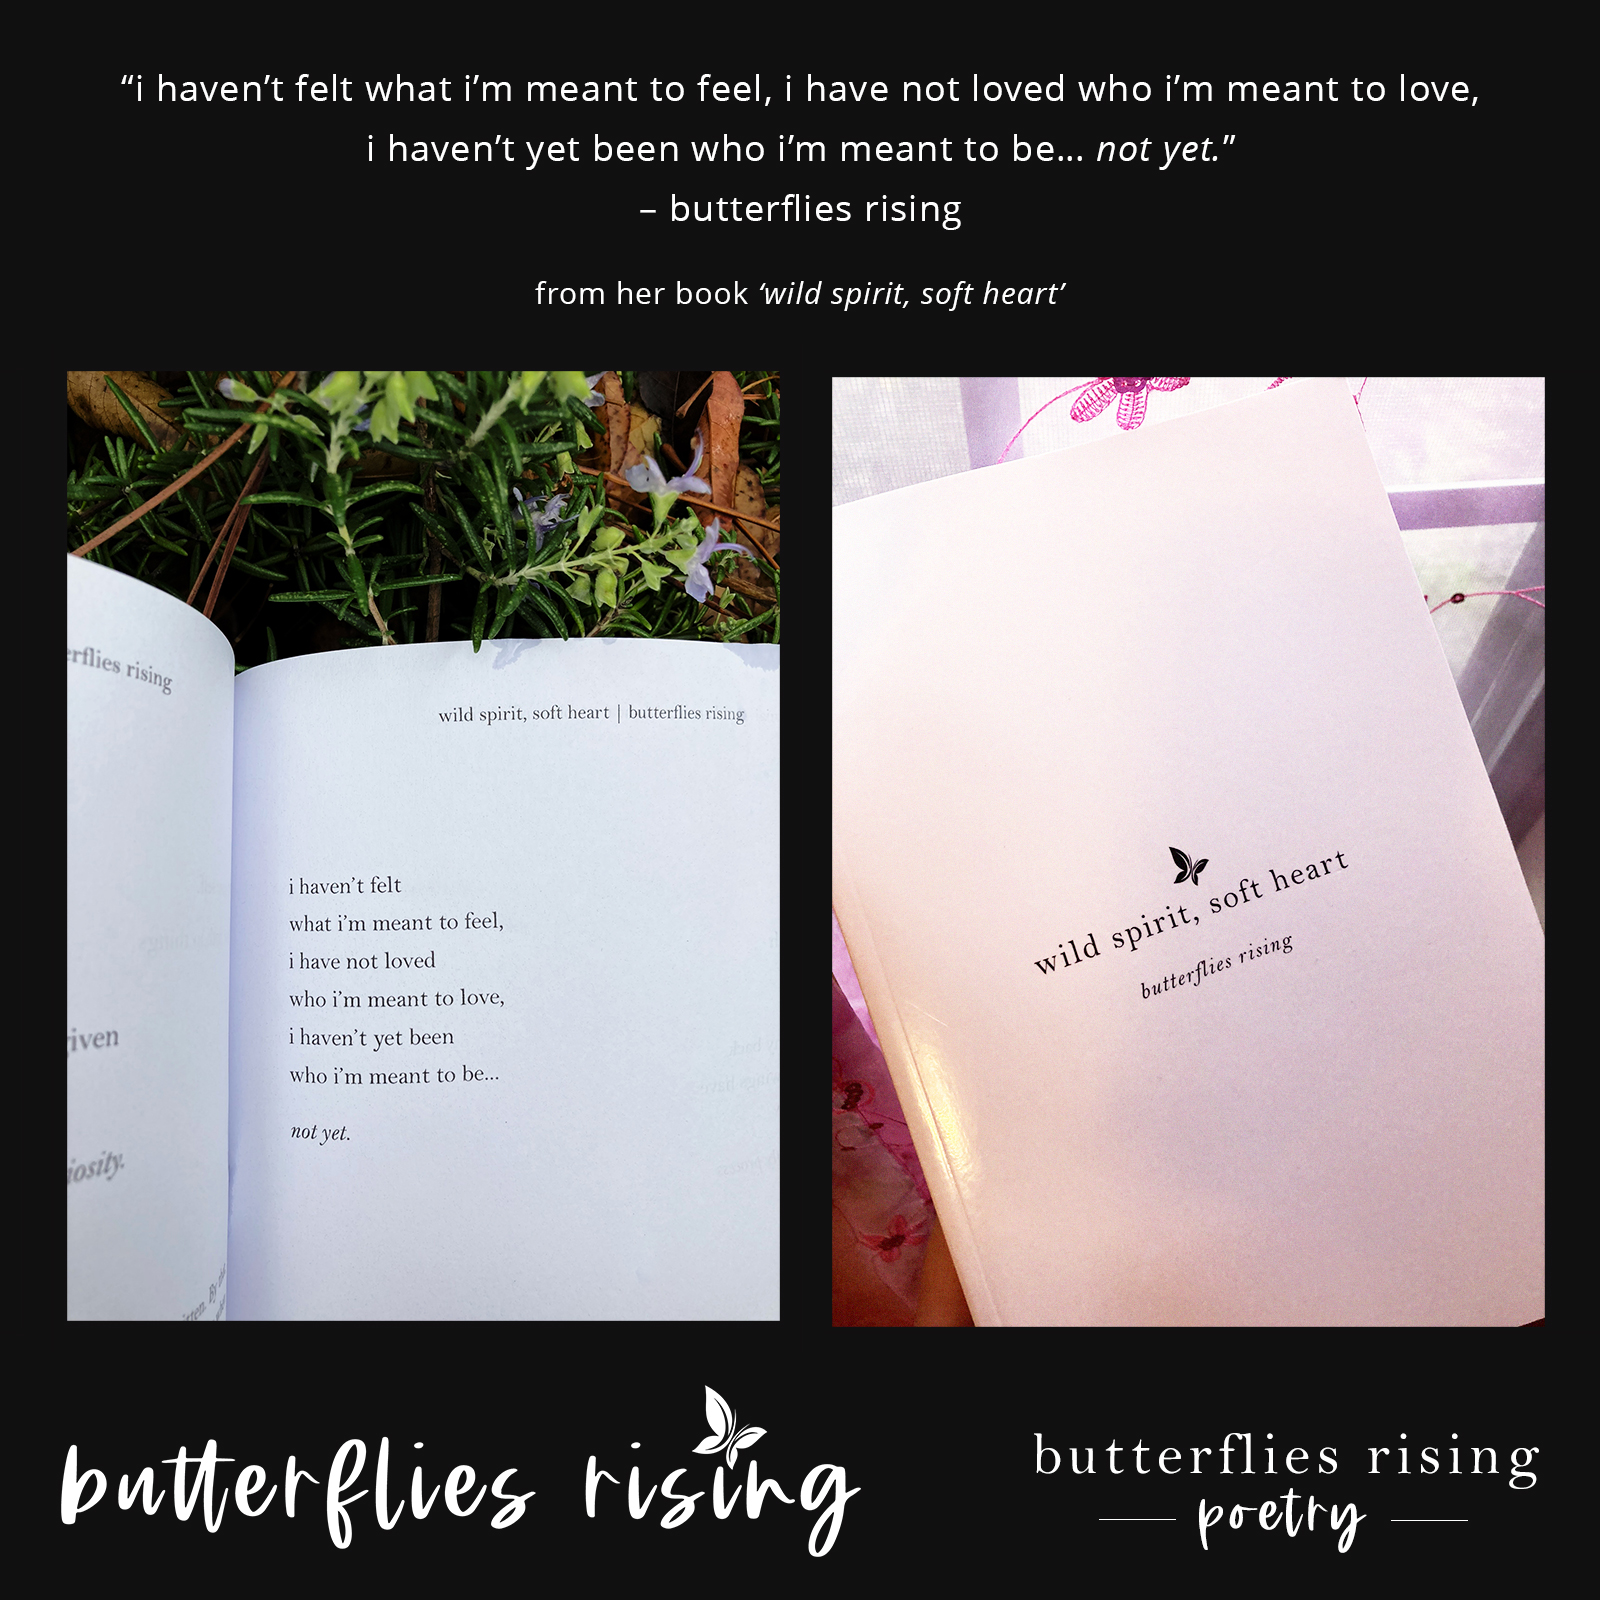 i haven’t felt what i’m meant to feel, i have not loved who i’m meant to love - butterflies rising